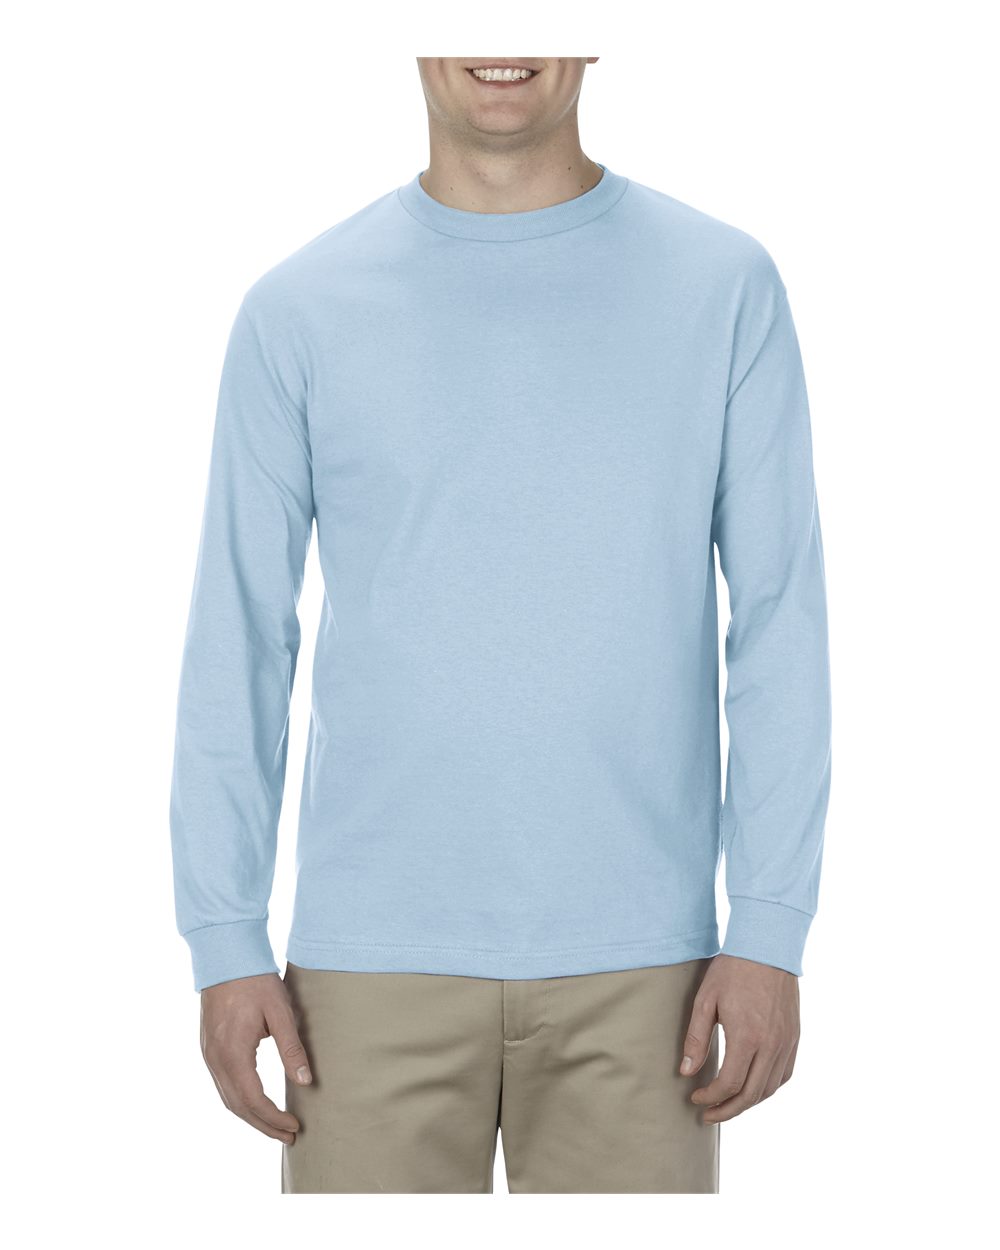 click to view Powder Blue